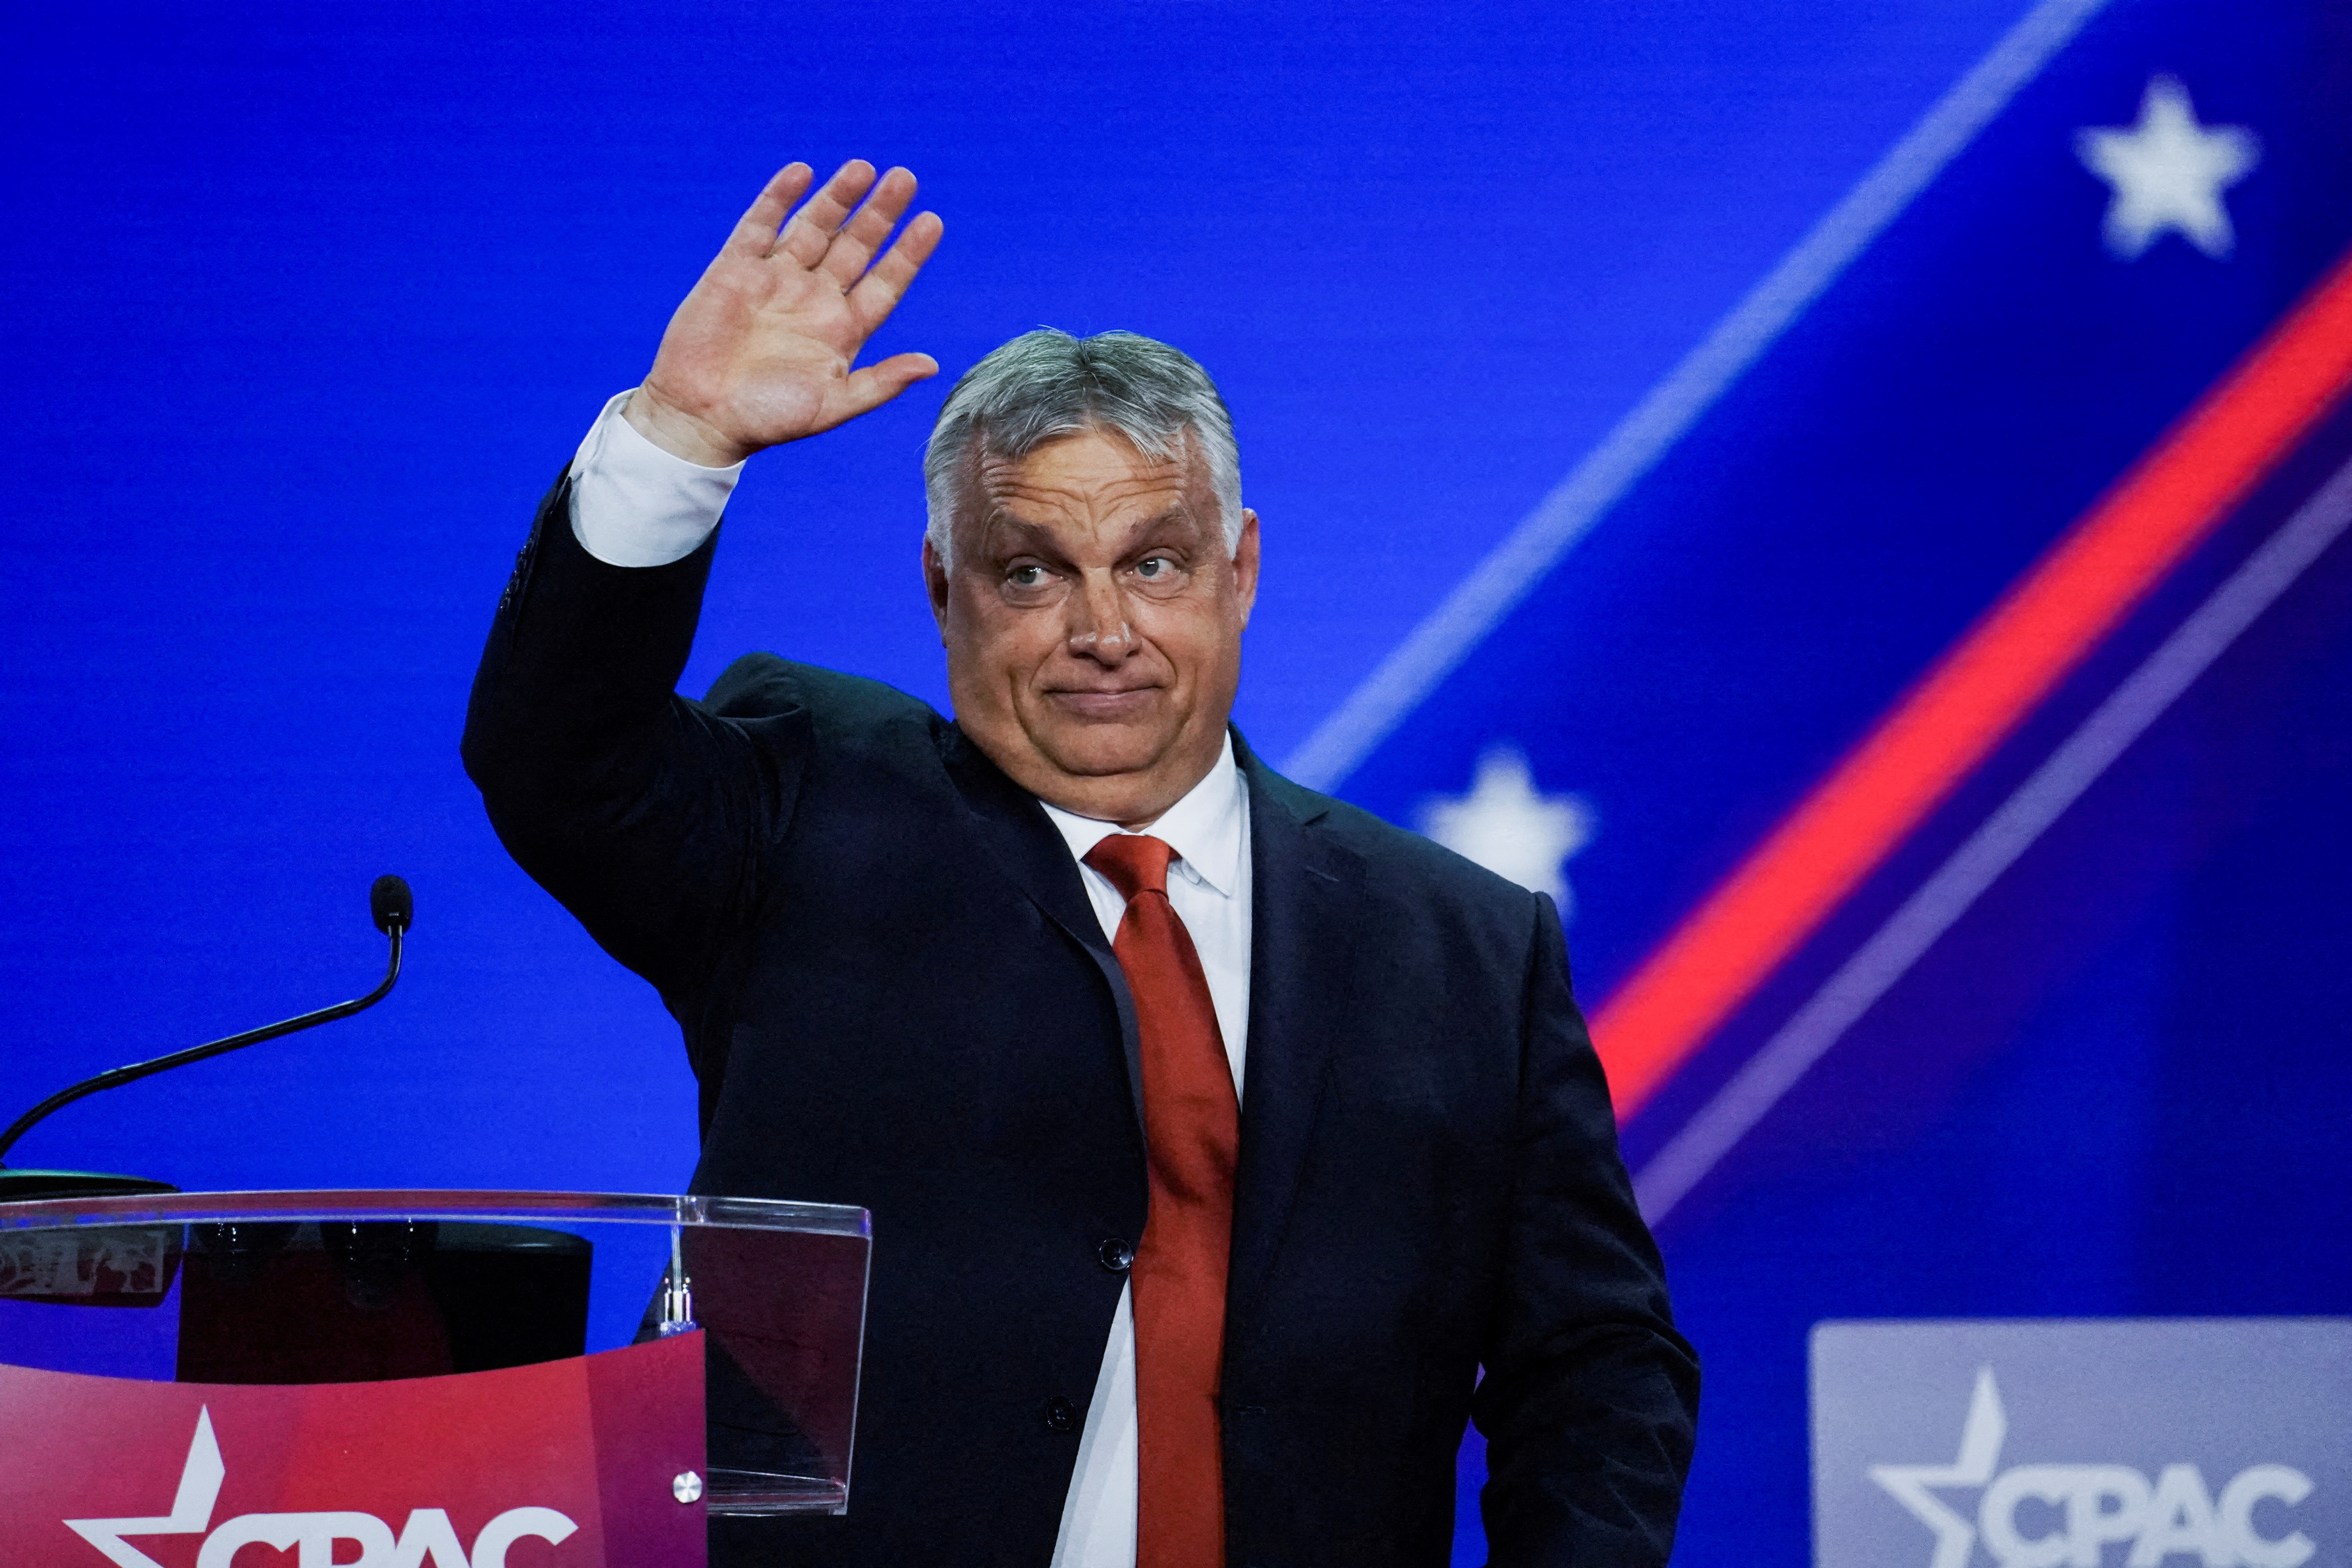 Prime Minister of Hungary Viktor Orban waves at the audience during general session at the Conservative Political Action Conference (CPAC) in Dallas, Texas, U.S., August 4, 2022